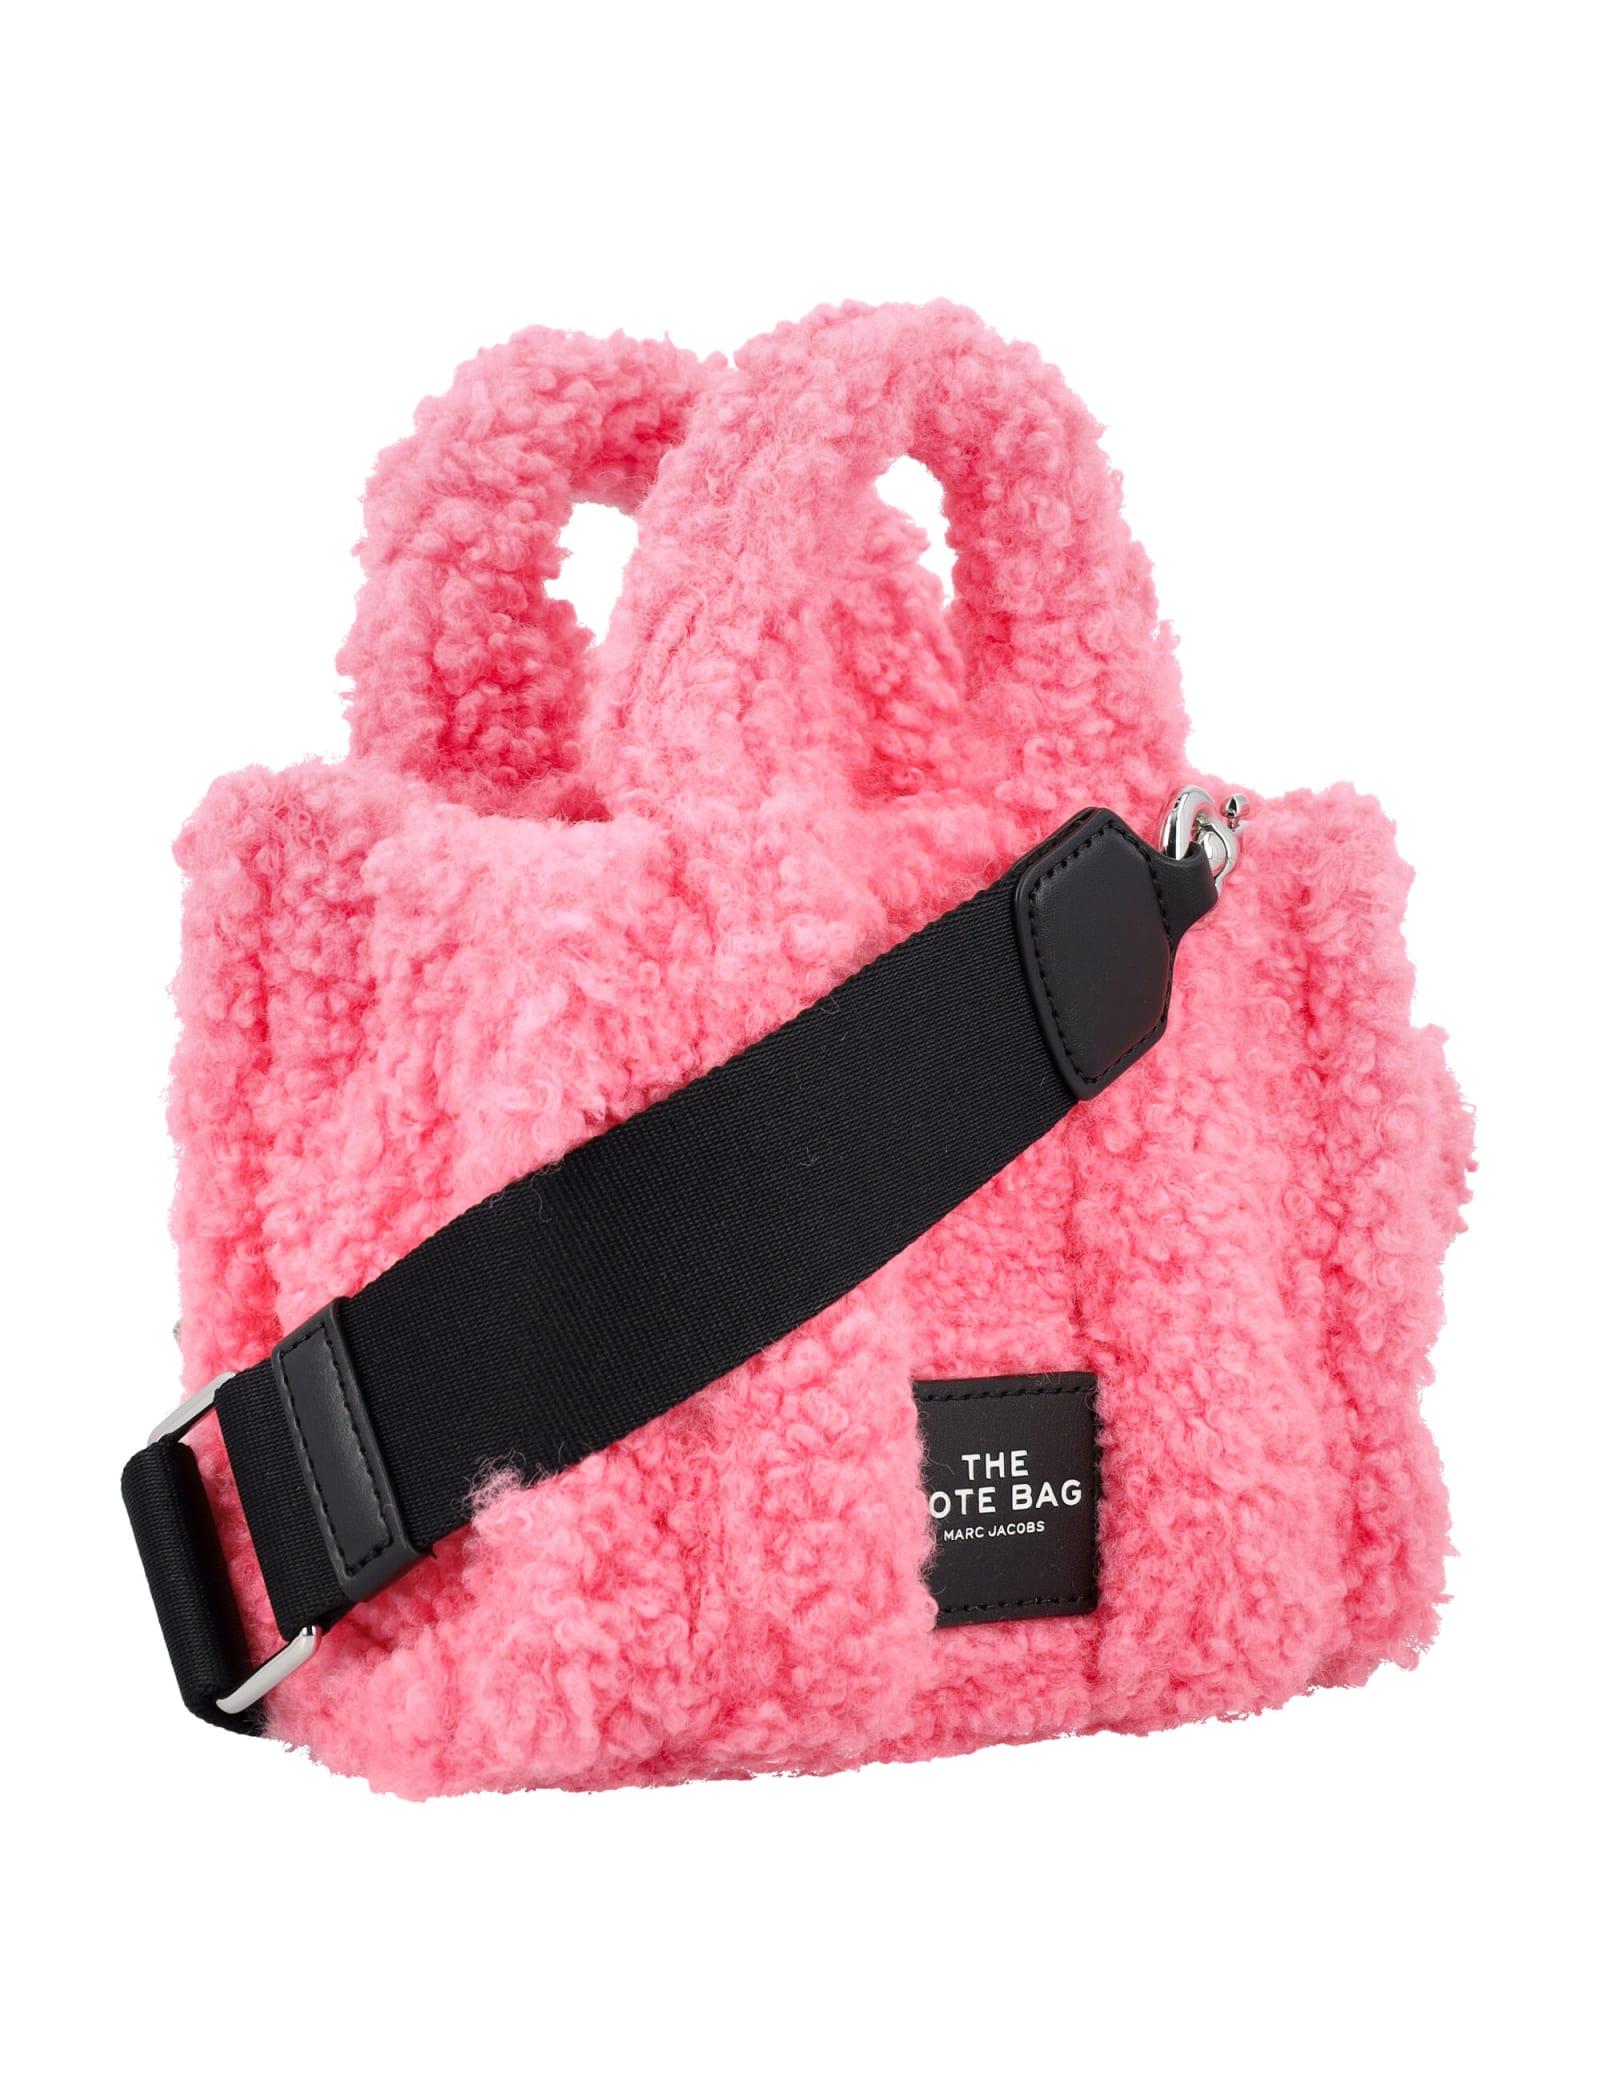 Marc Jacobs The Teddy Micro Tote Bag in Pink